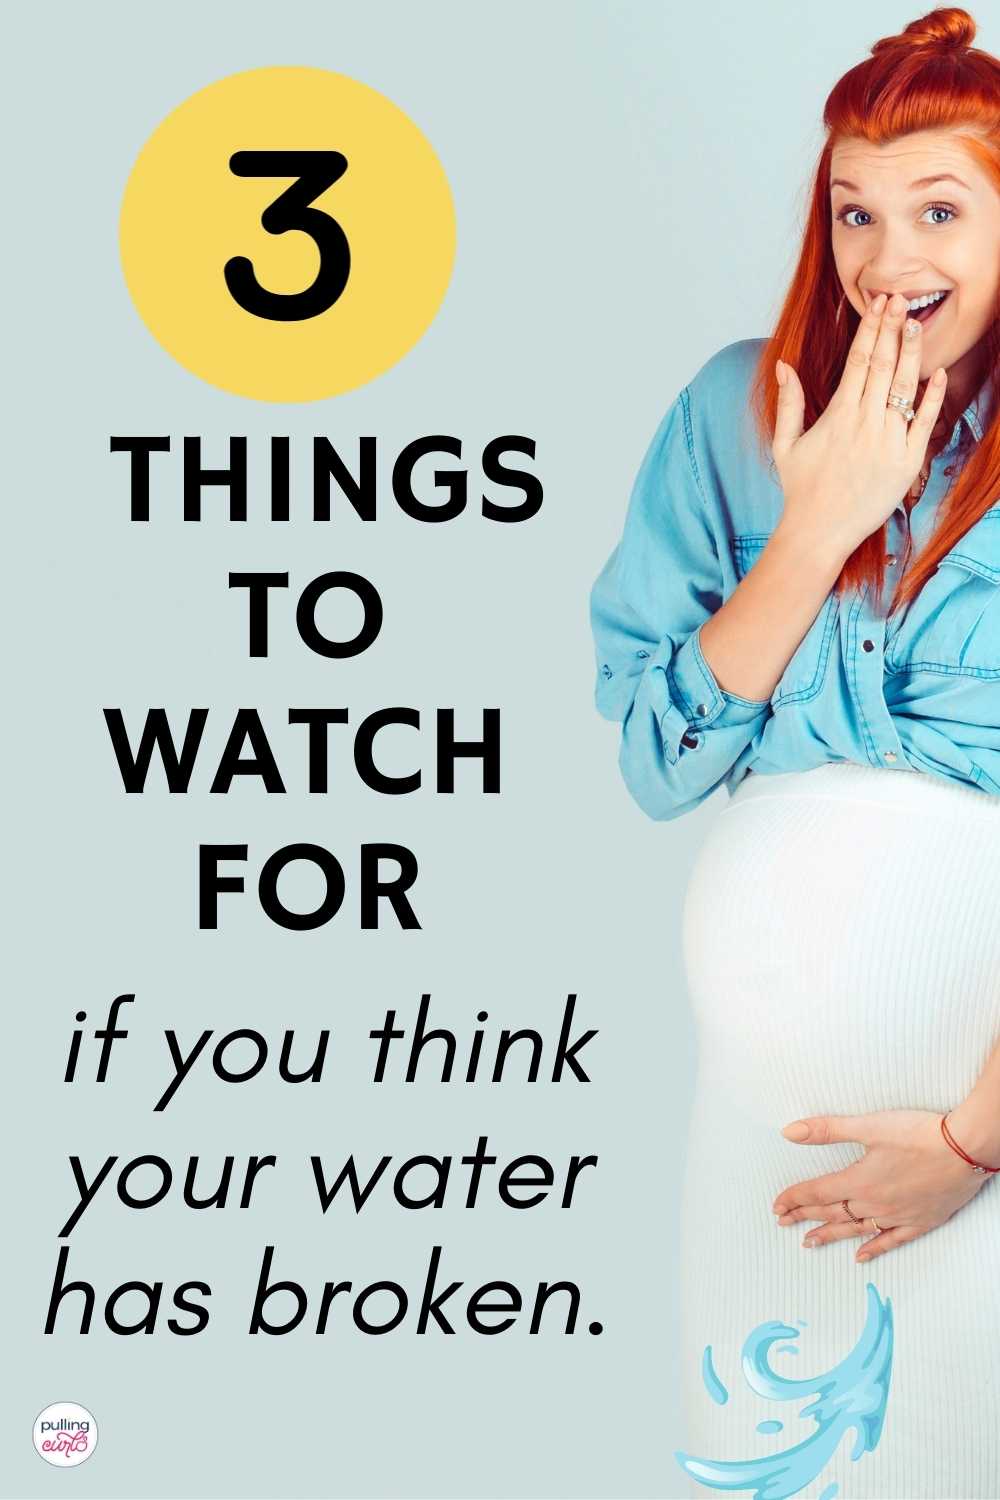 pregnant woman holding her crotch / 3 things to watch for if you think your water has broken. via @pullingcurls